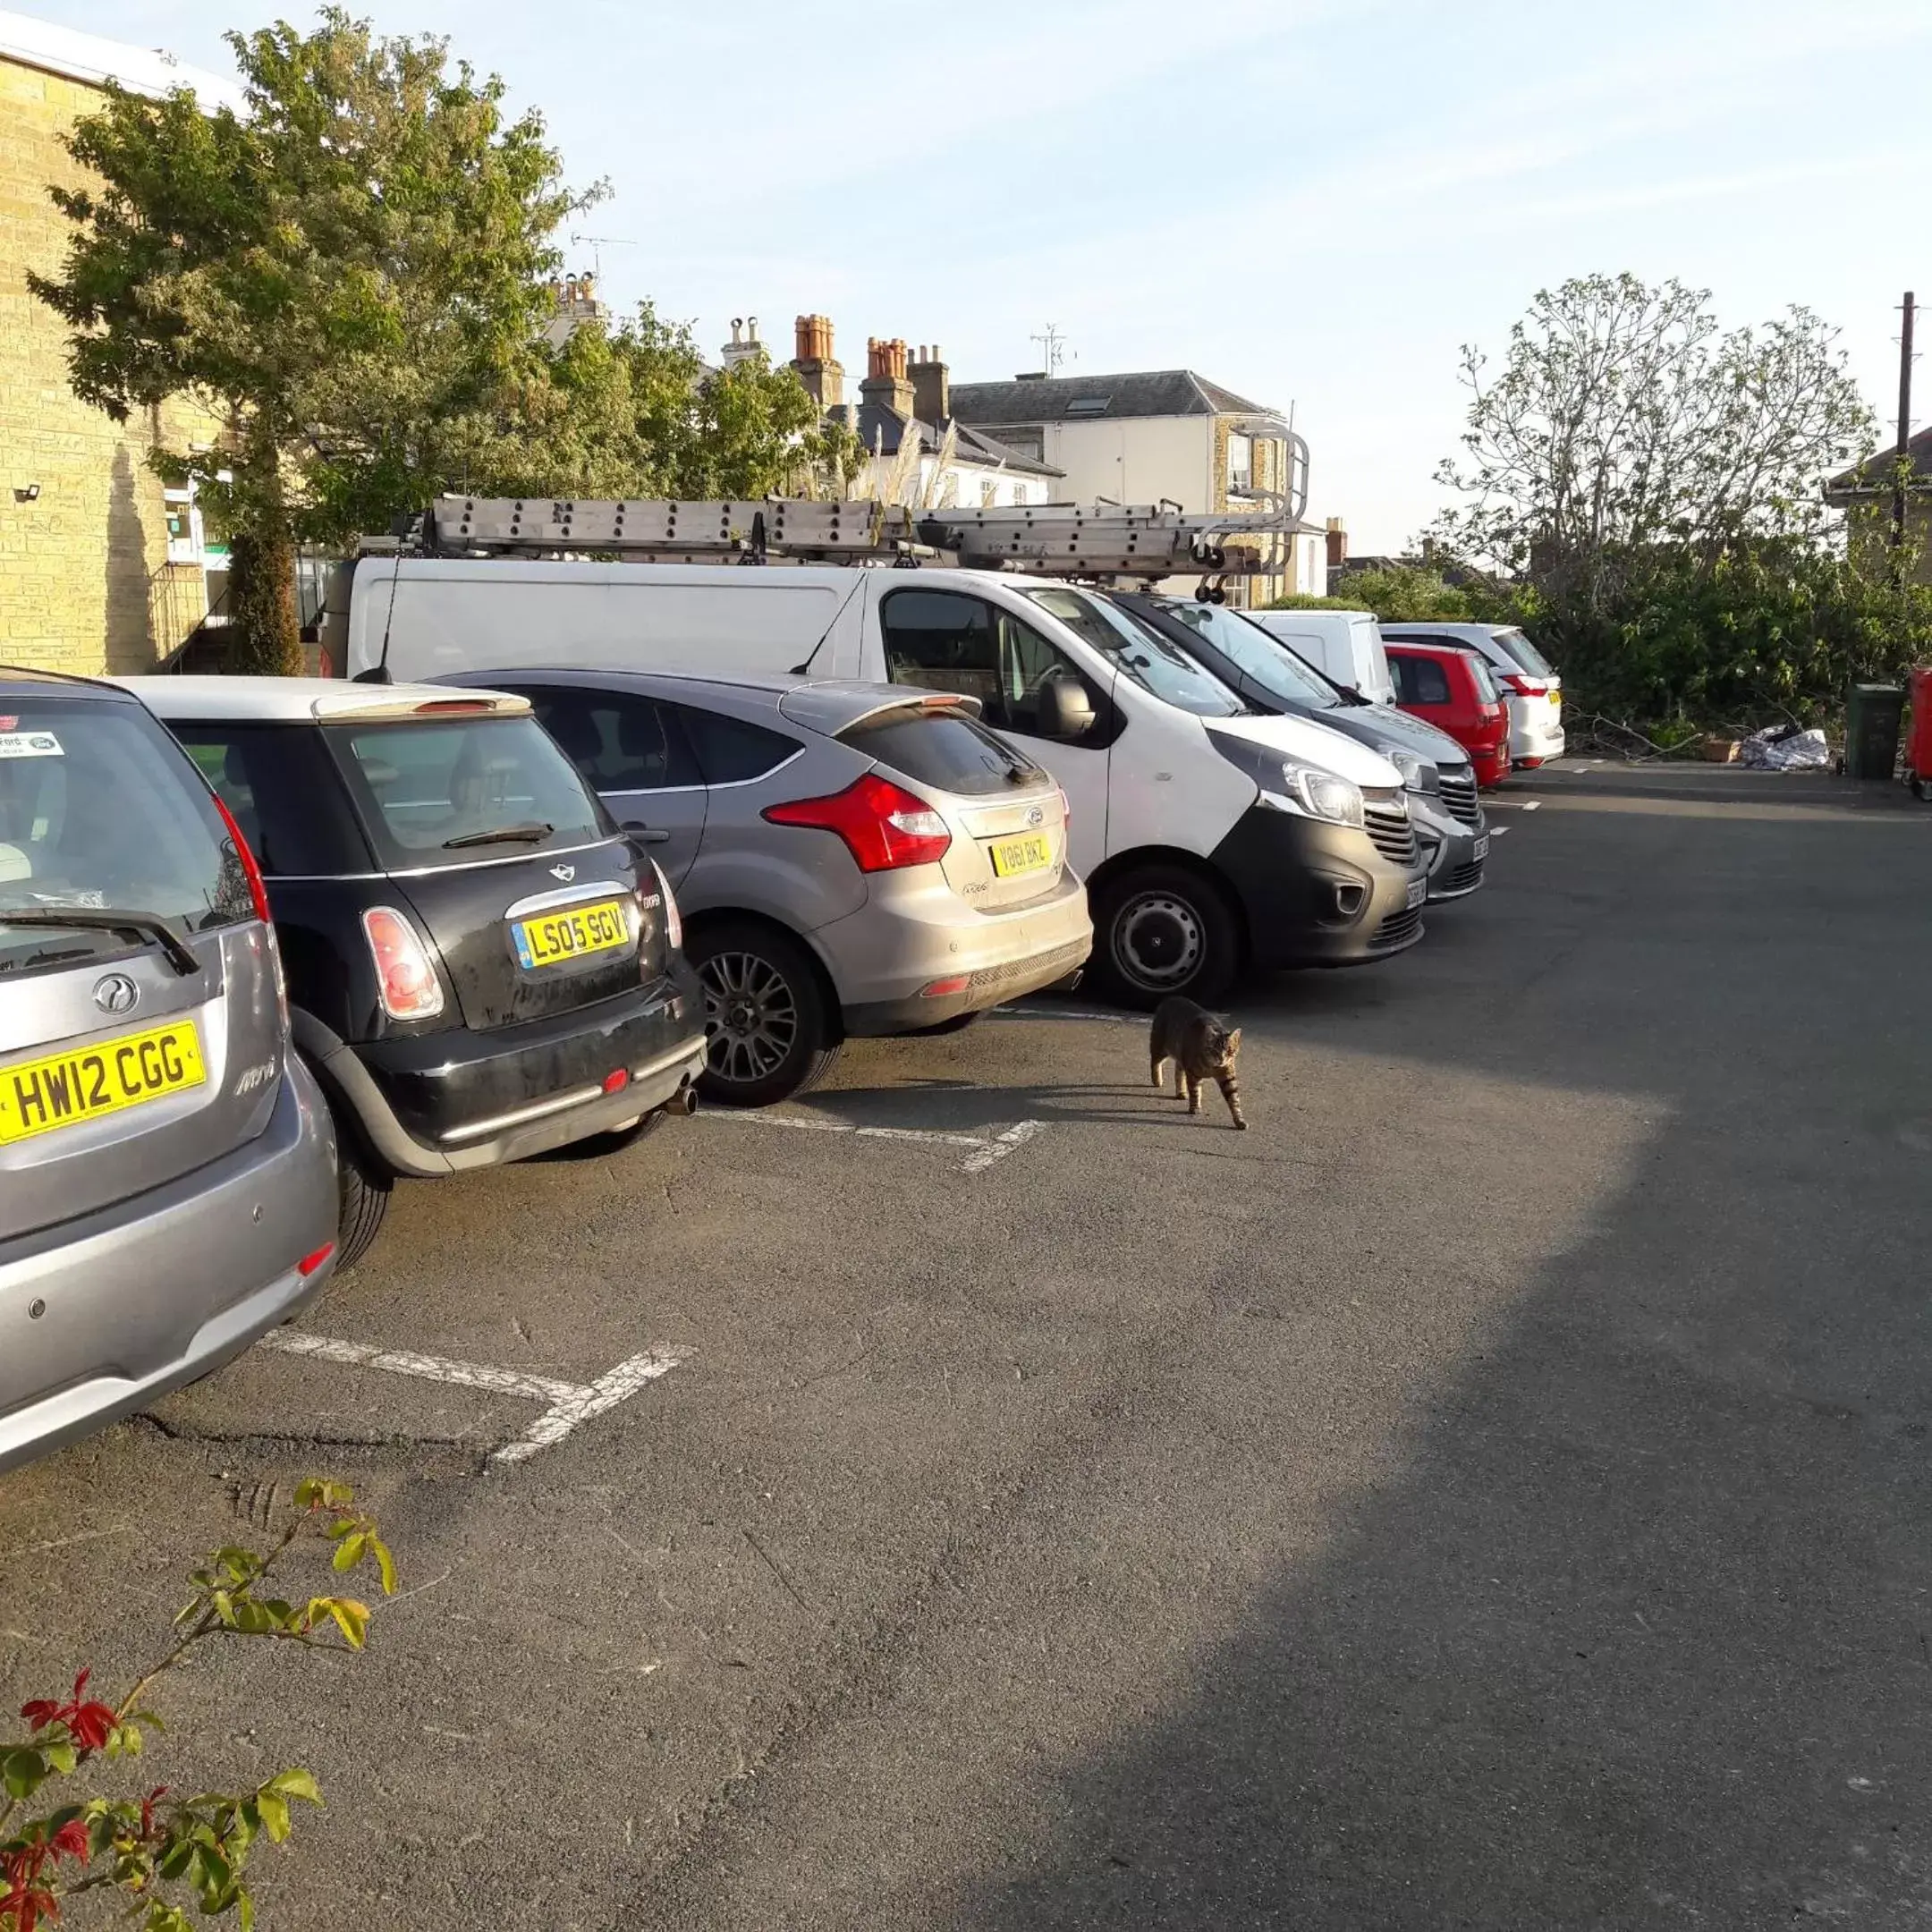 Parking in Dorset Hotel, Isle of Wight